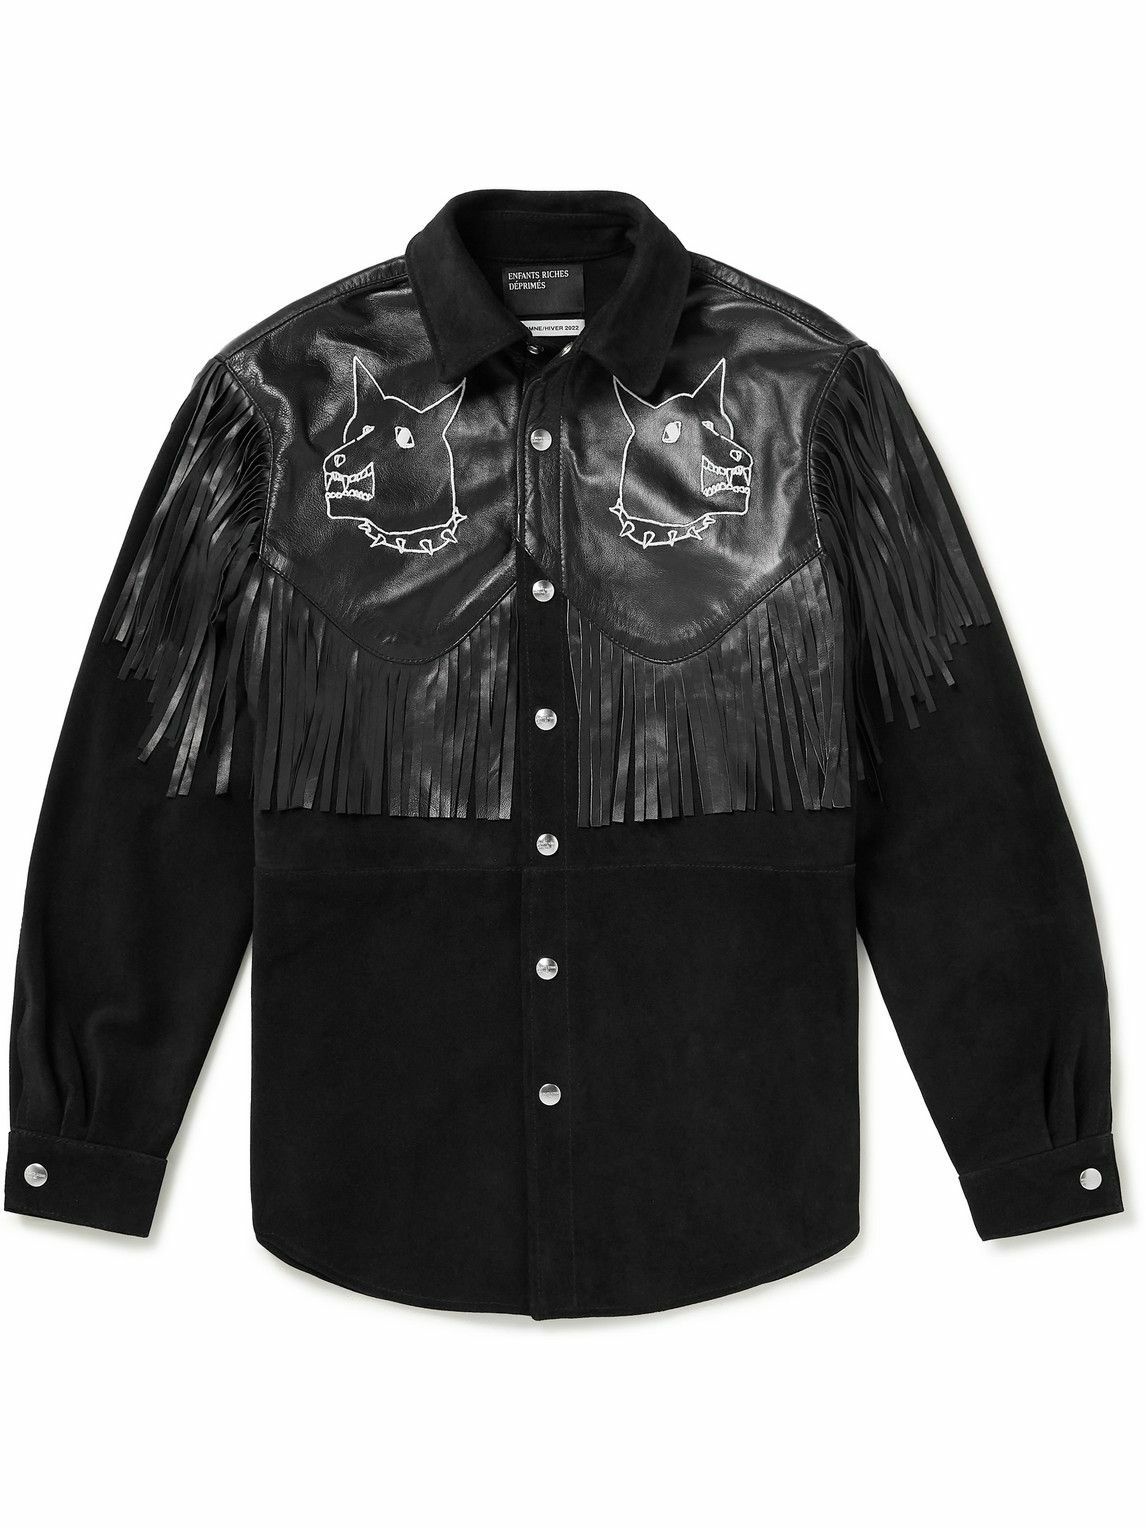 Photo: Enfants Riches Déprimés - Fringed Embroidered Leather and Suede Western Shirt - Black